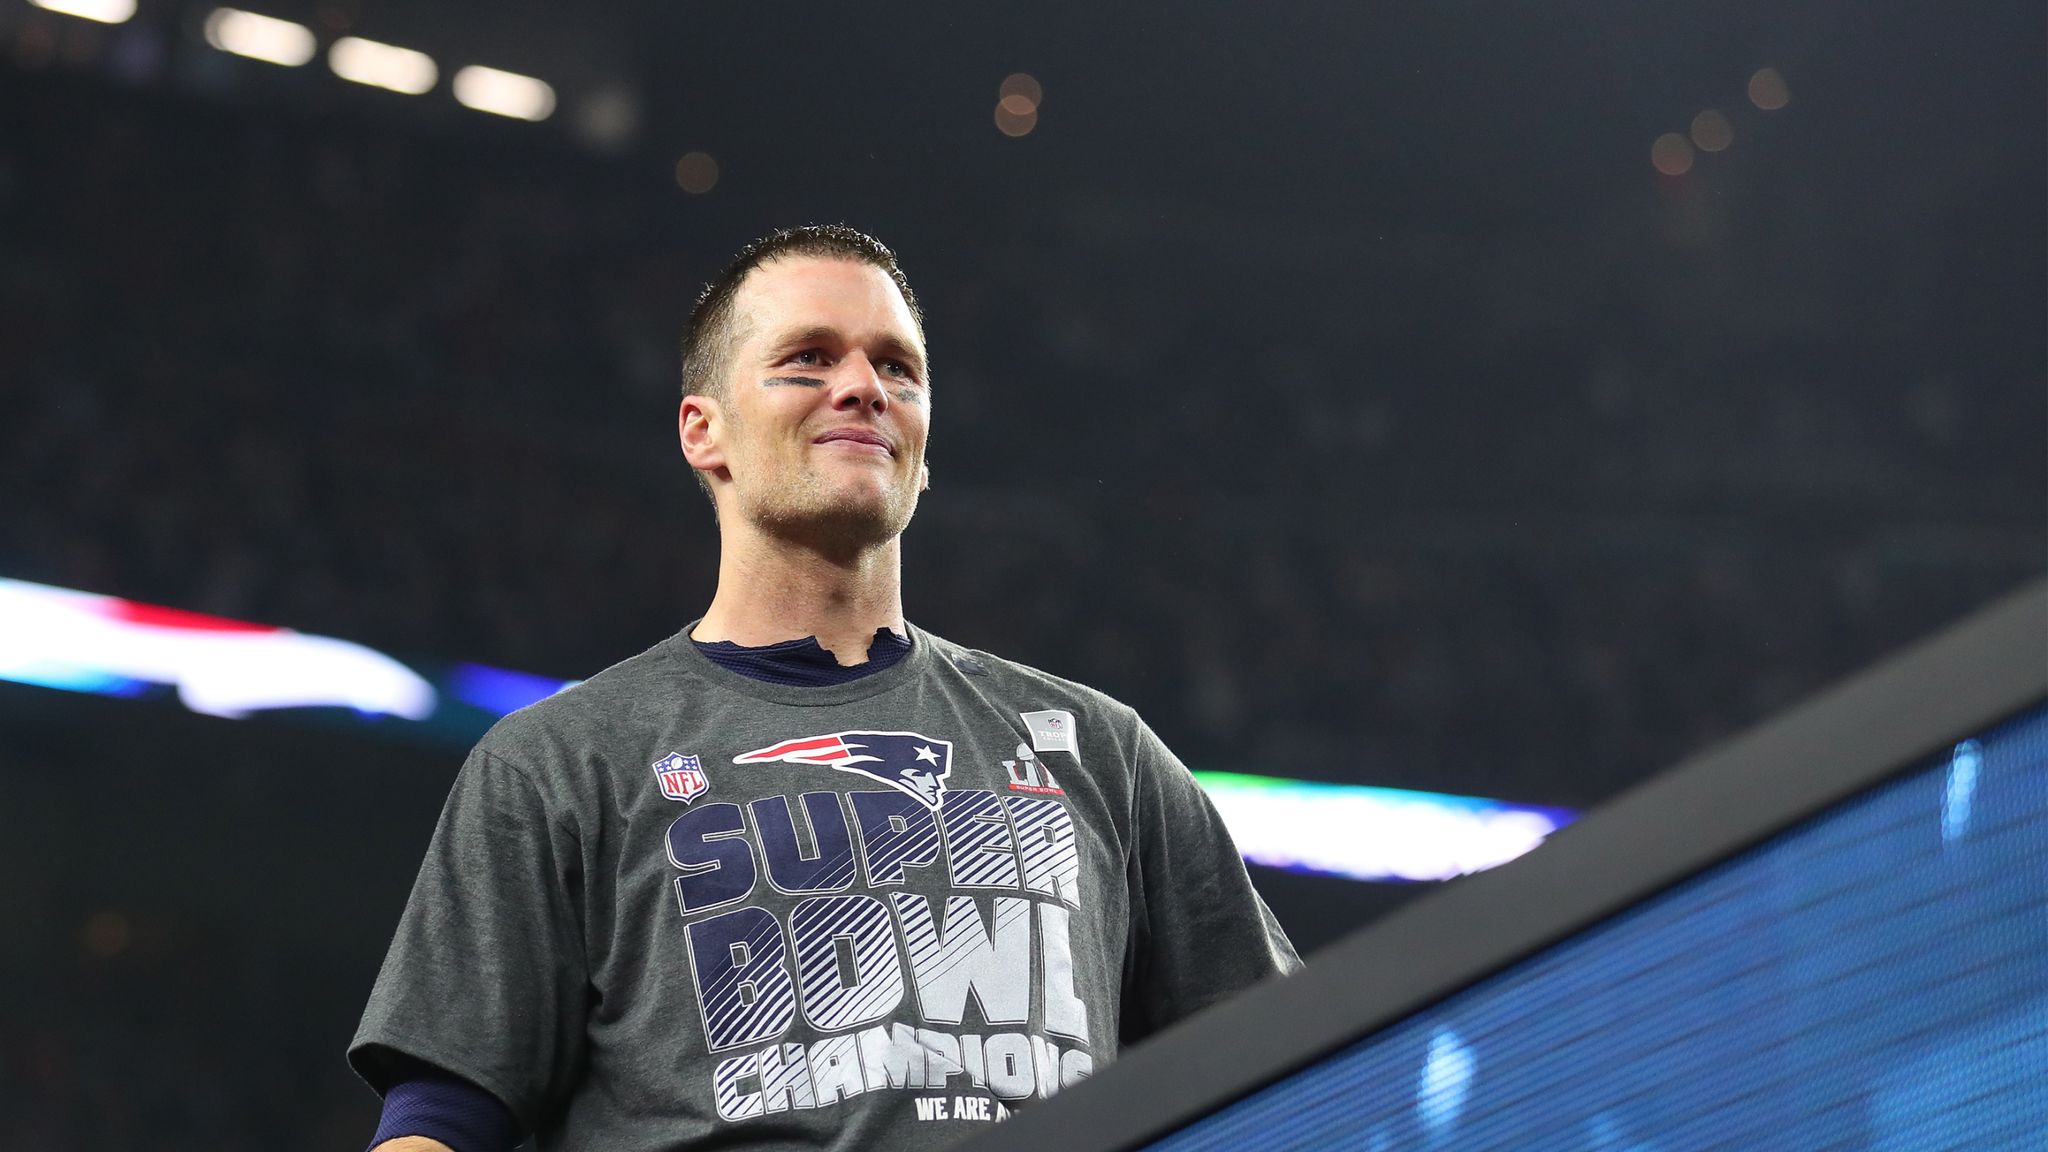 The story behind Tom Brady's jersey disappearing revealed on Fox ...